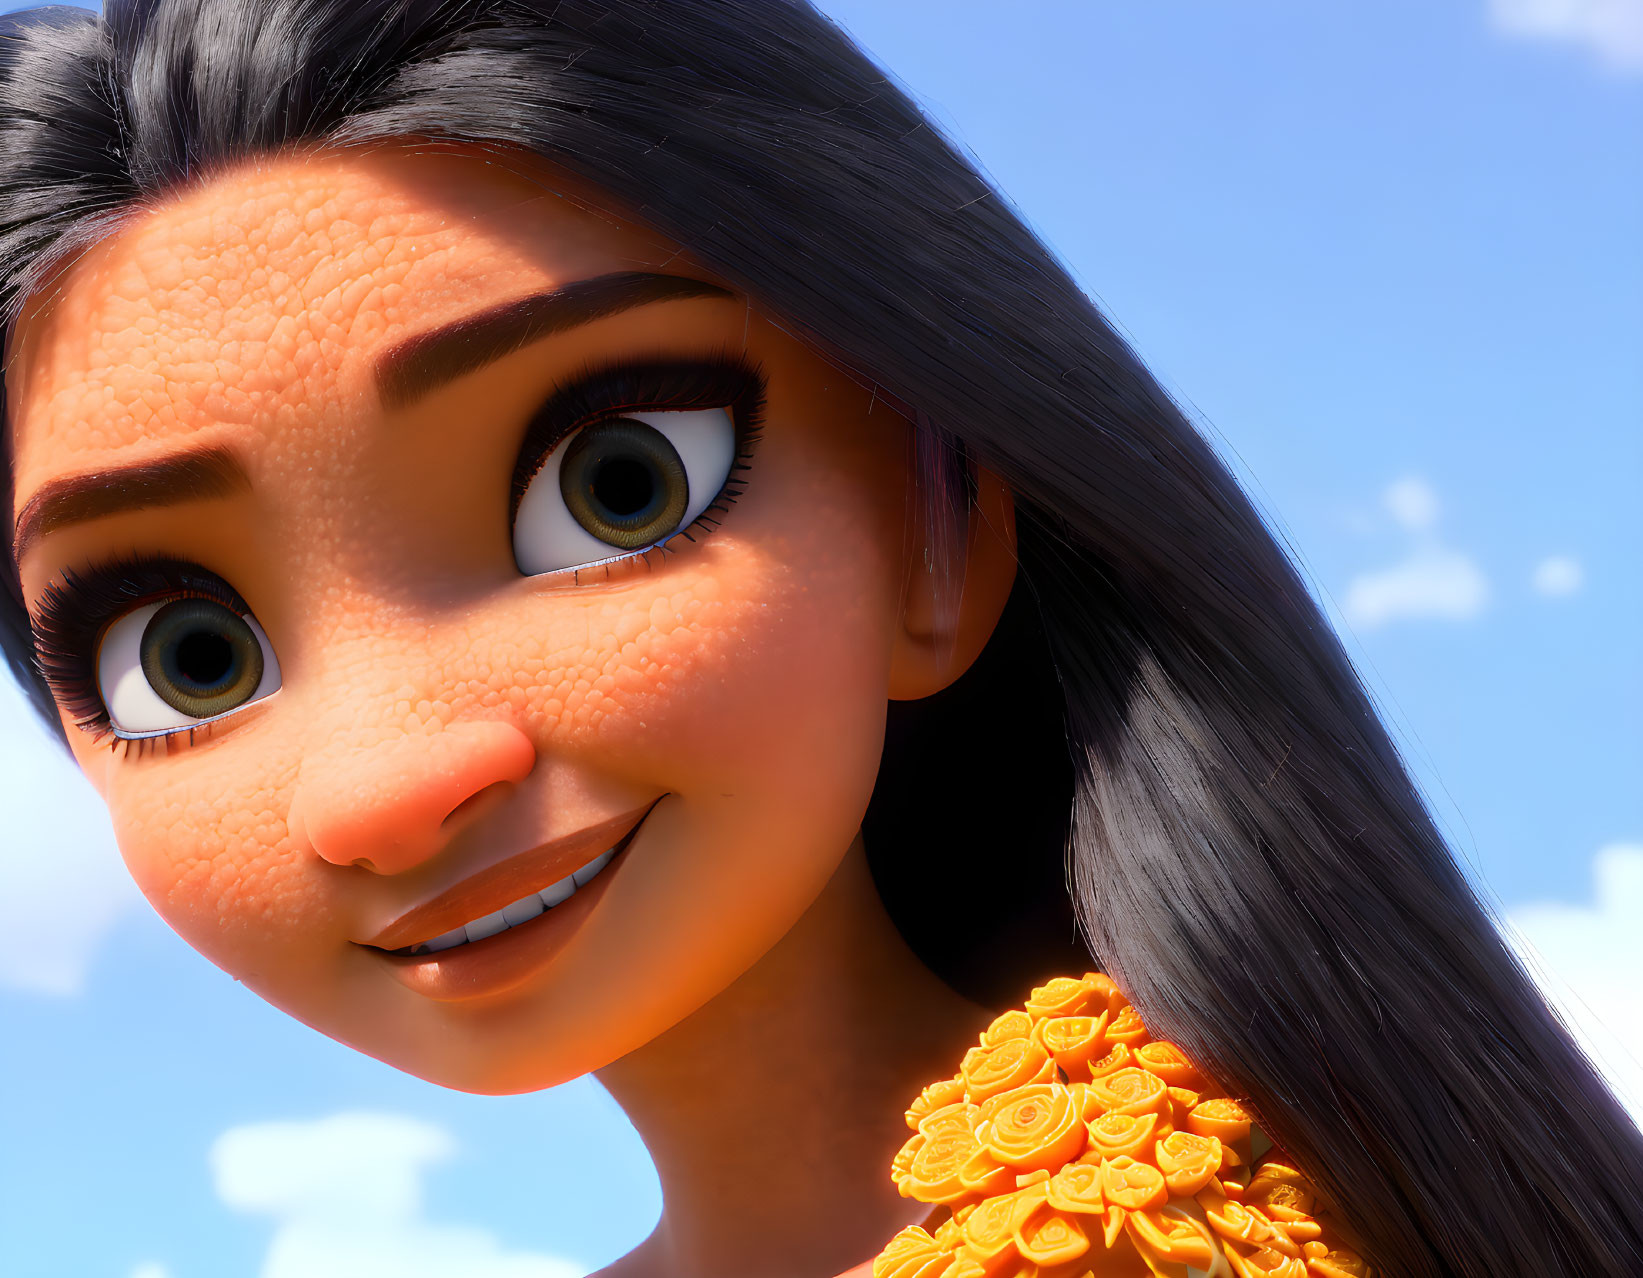 3D animated character with large eyes and orange floral adornment smiling against blue sky